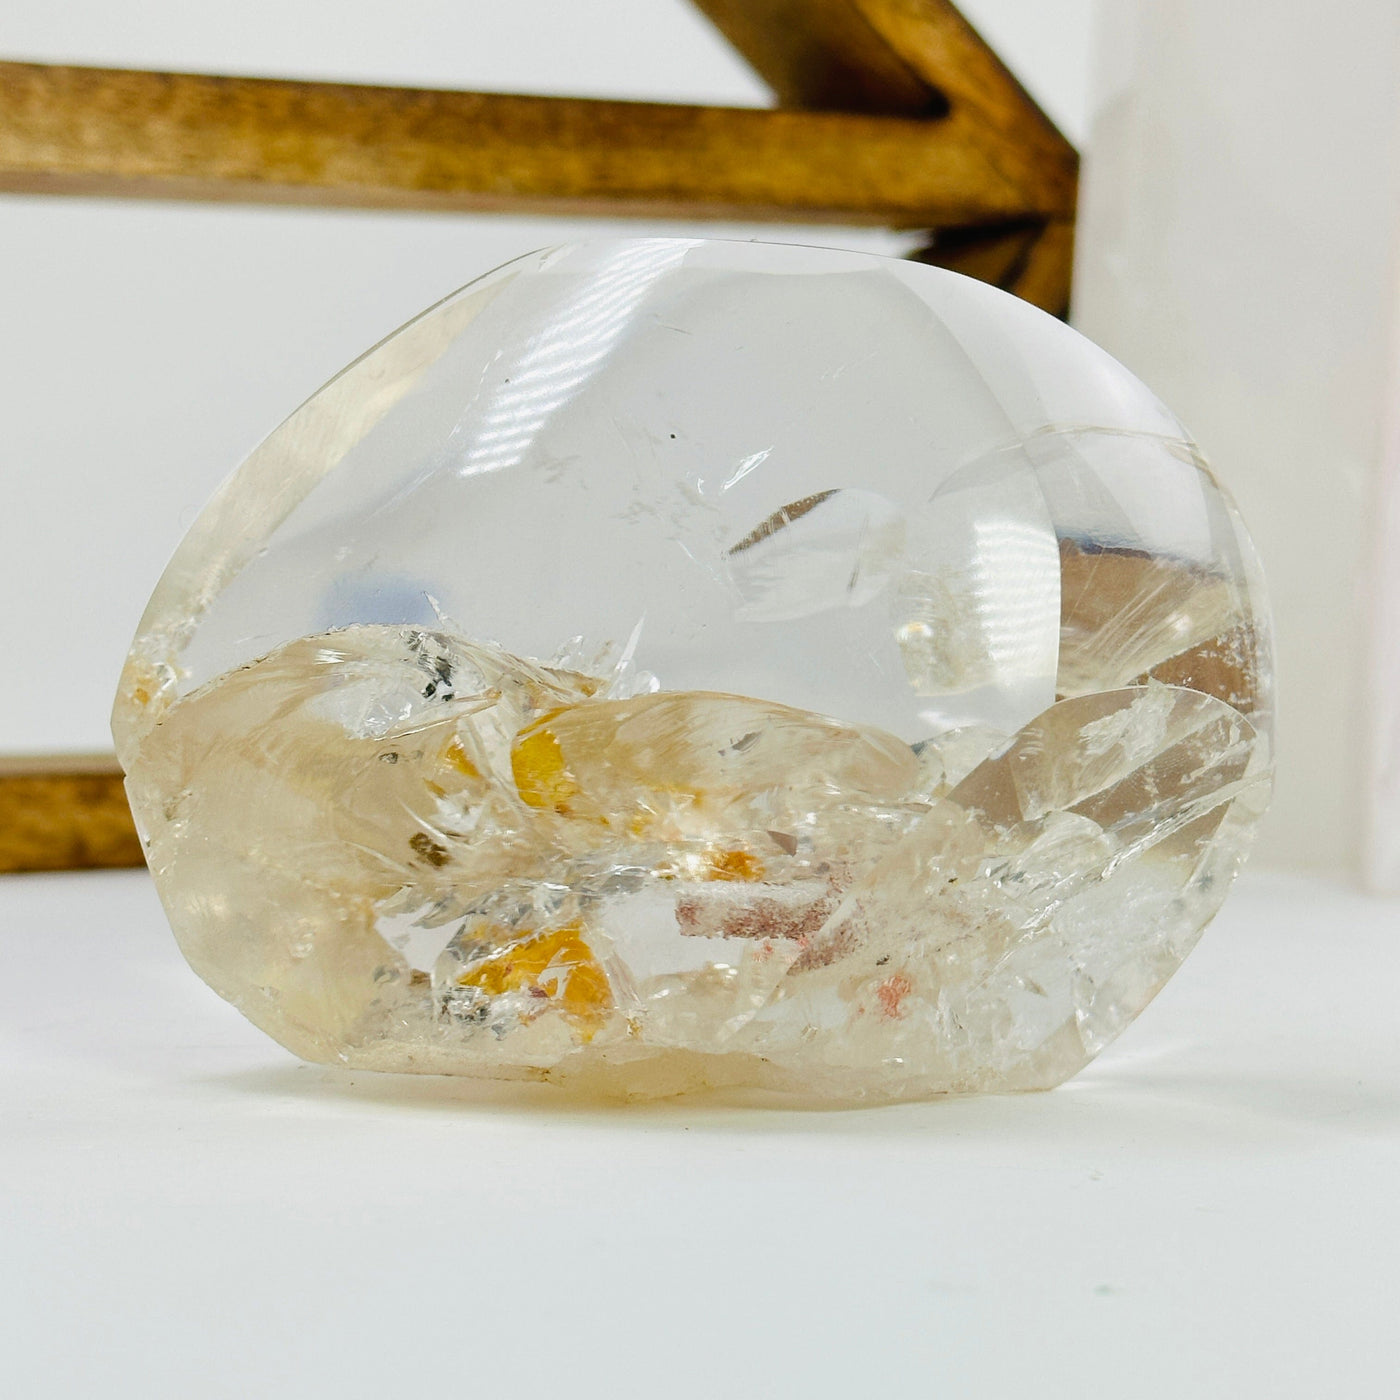 crystal quartz with inclusions with decorations in the background